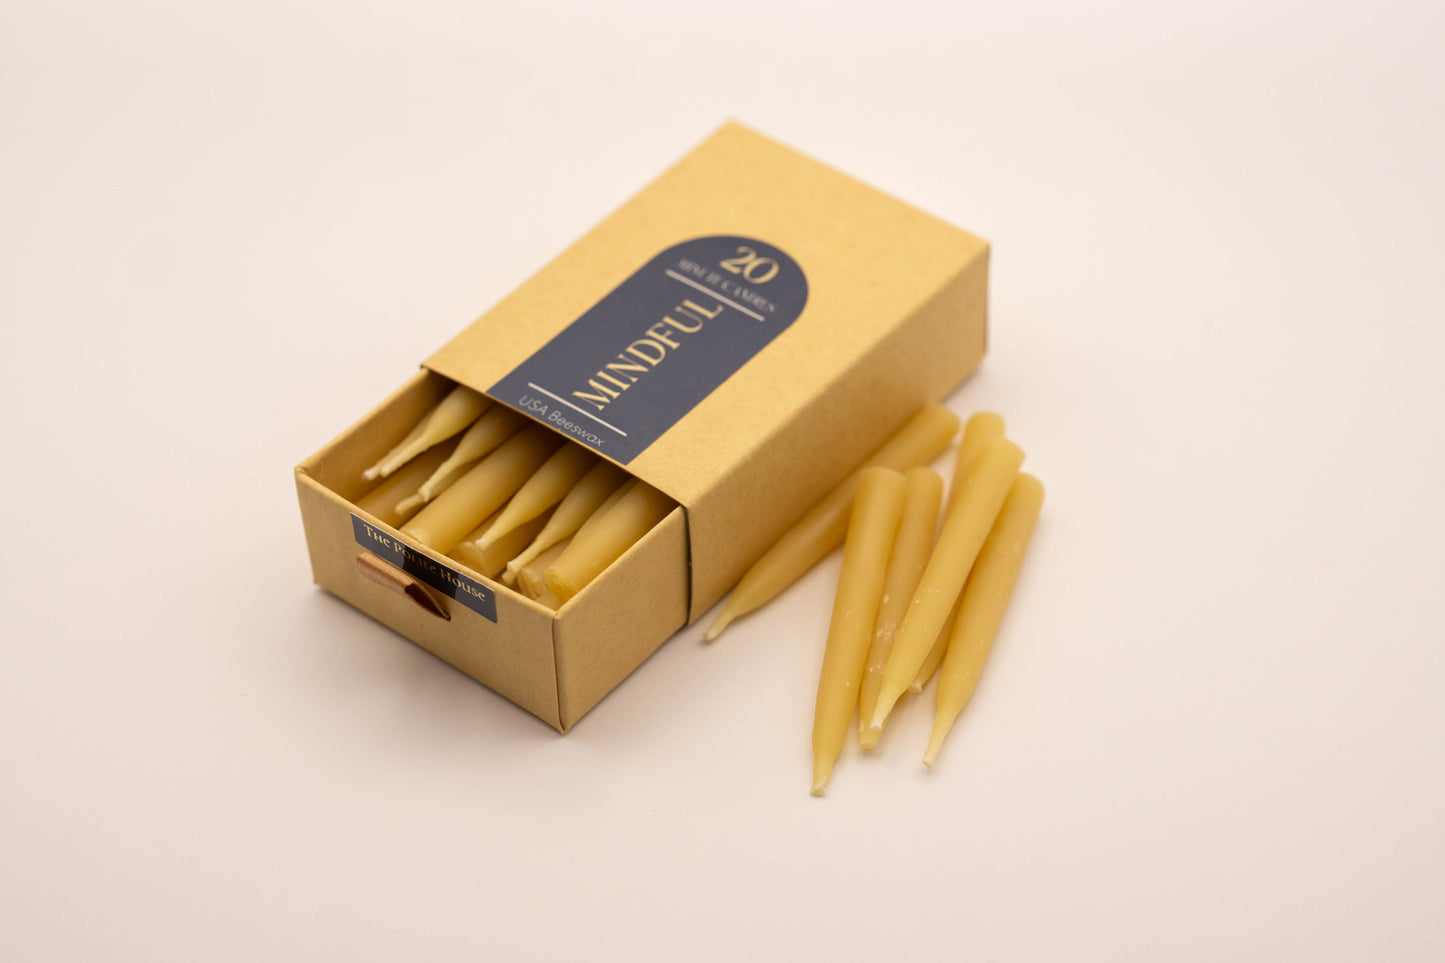 20-Minute Beeswax Candles - REFILL Candles: Set of 30, No Holder